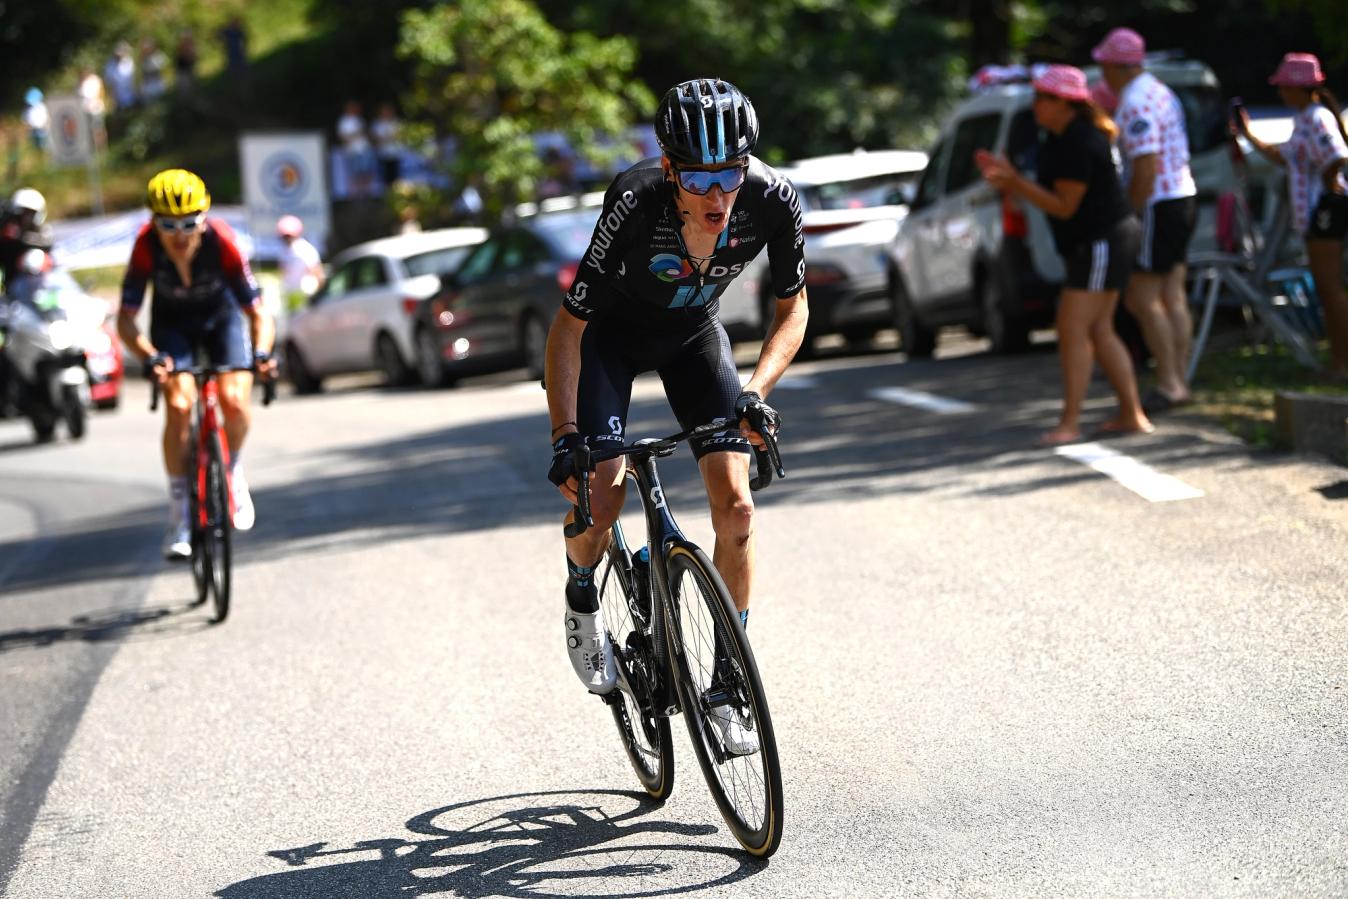 Finishing 6th at the 2022 Tour de France, Romain Bardet believes he was riding at the best level of his career